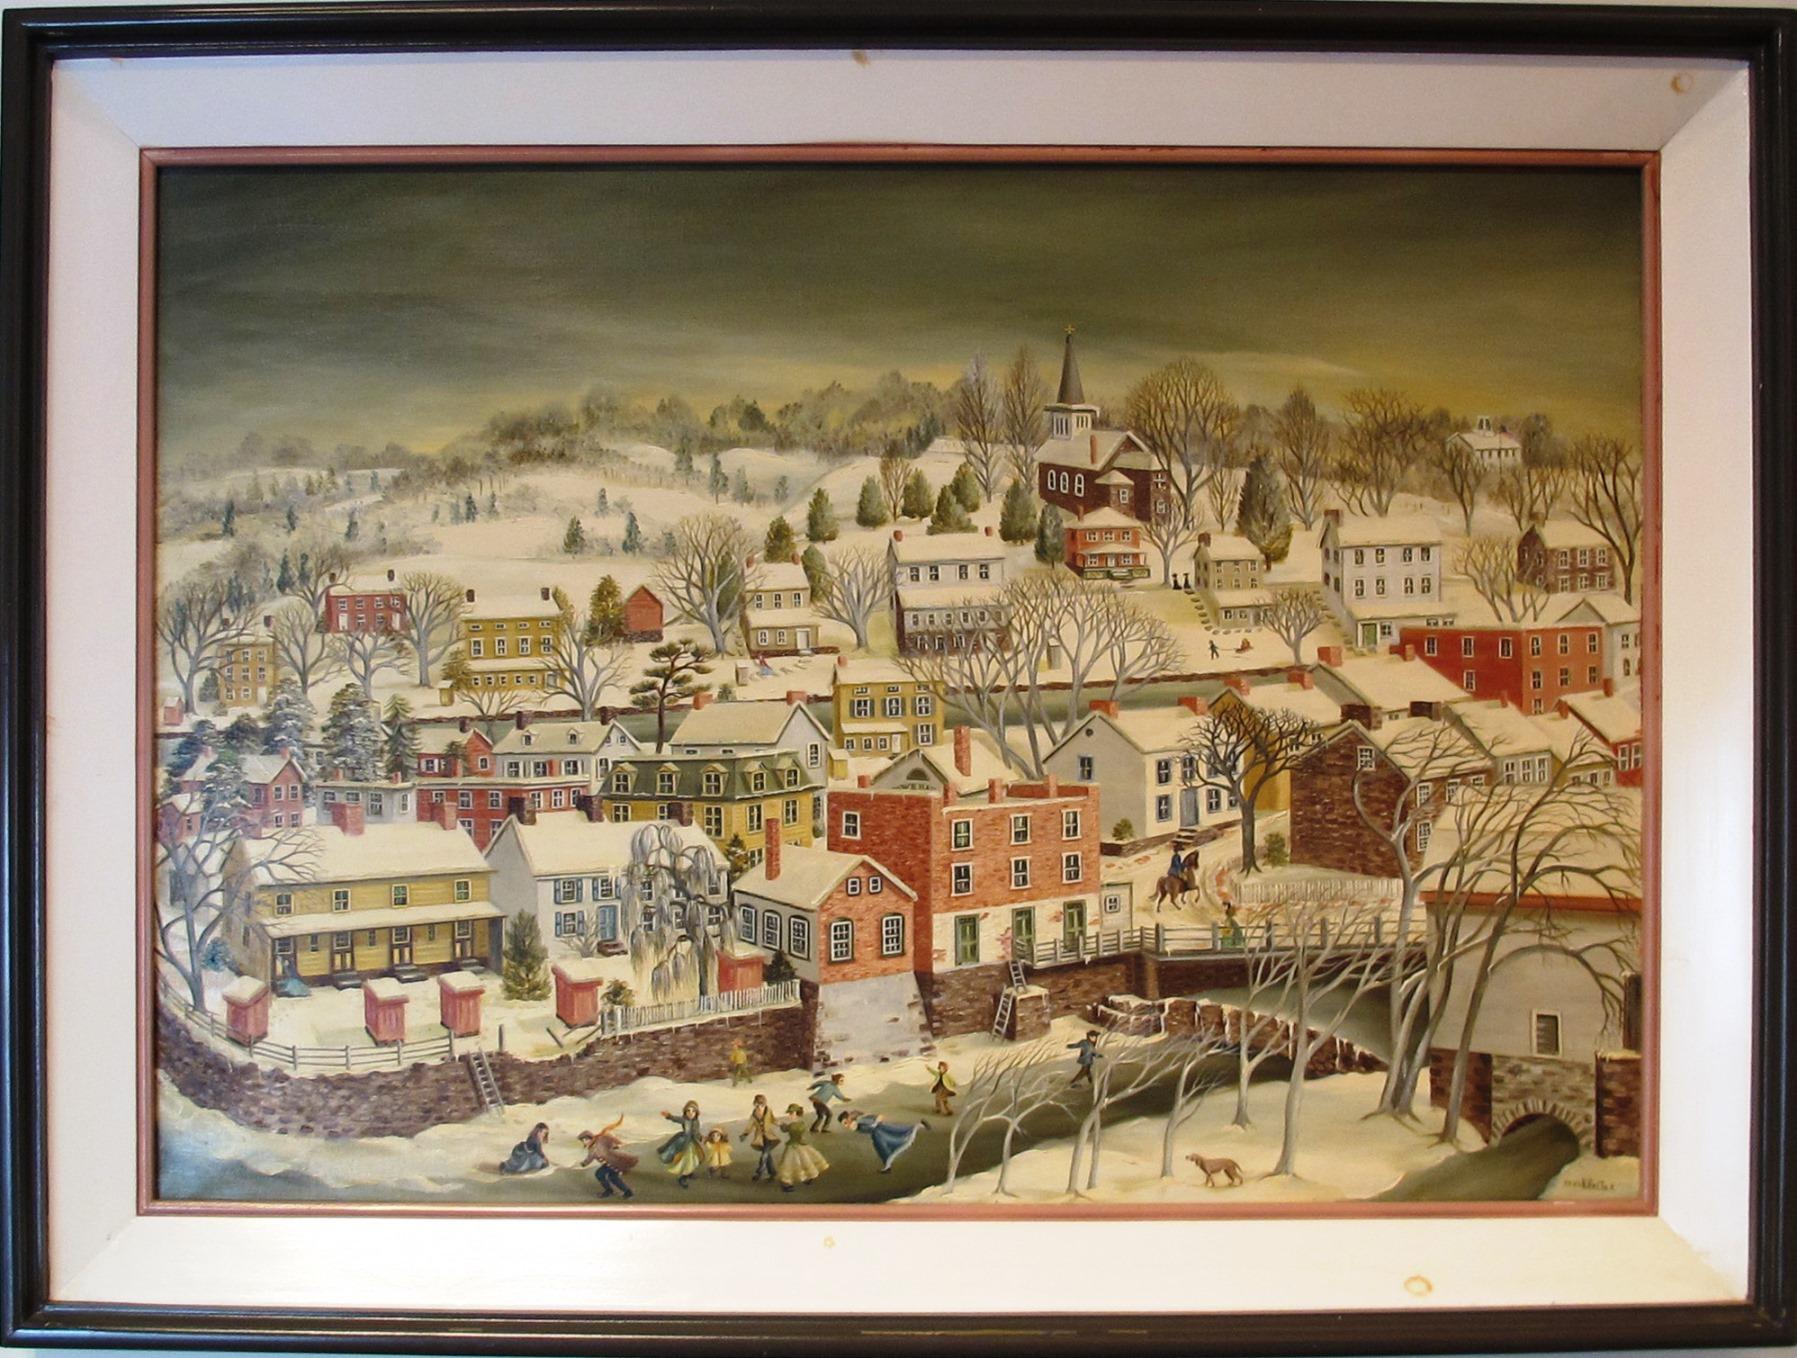 Jean H. Halter Landscape Painting - "Winter in New Hope"